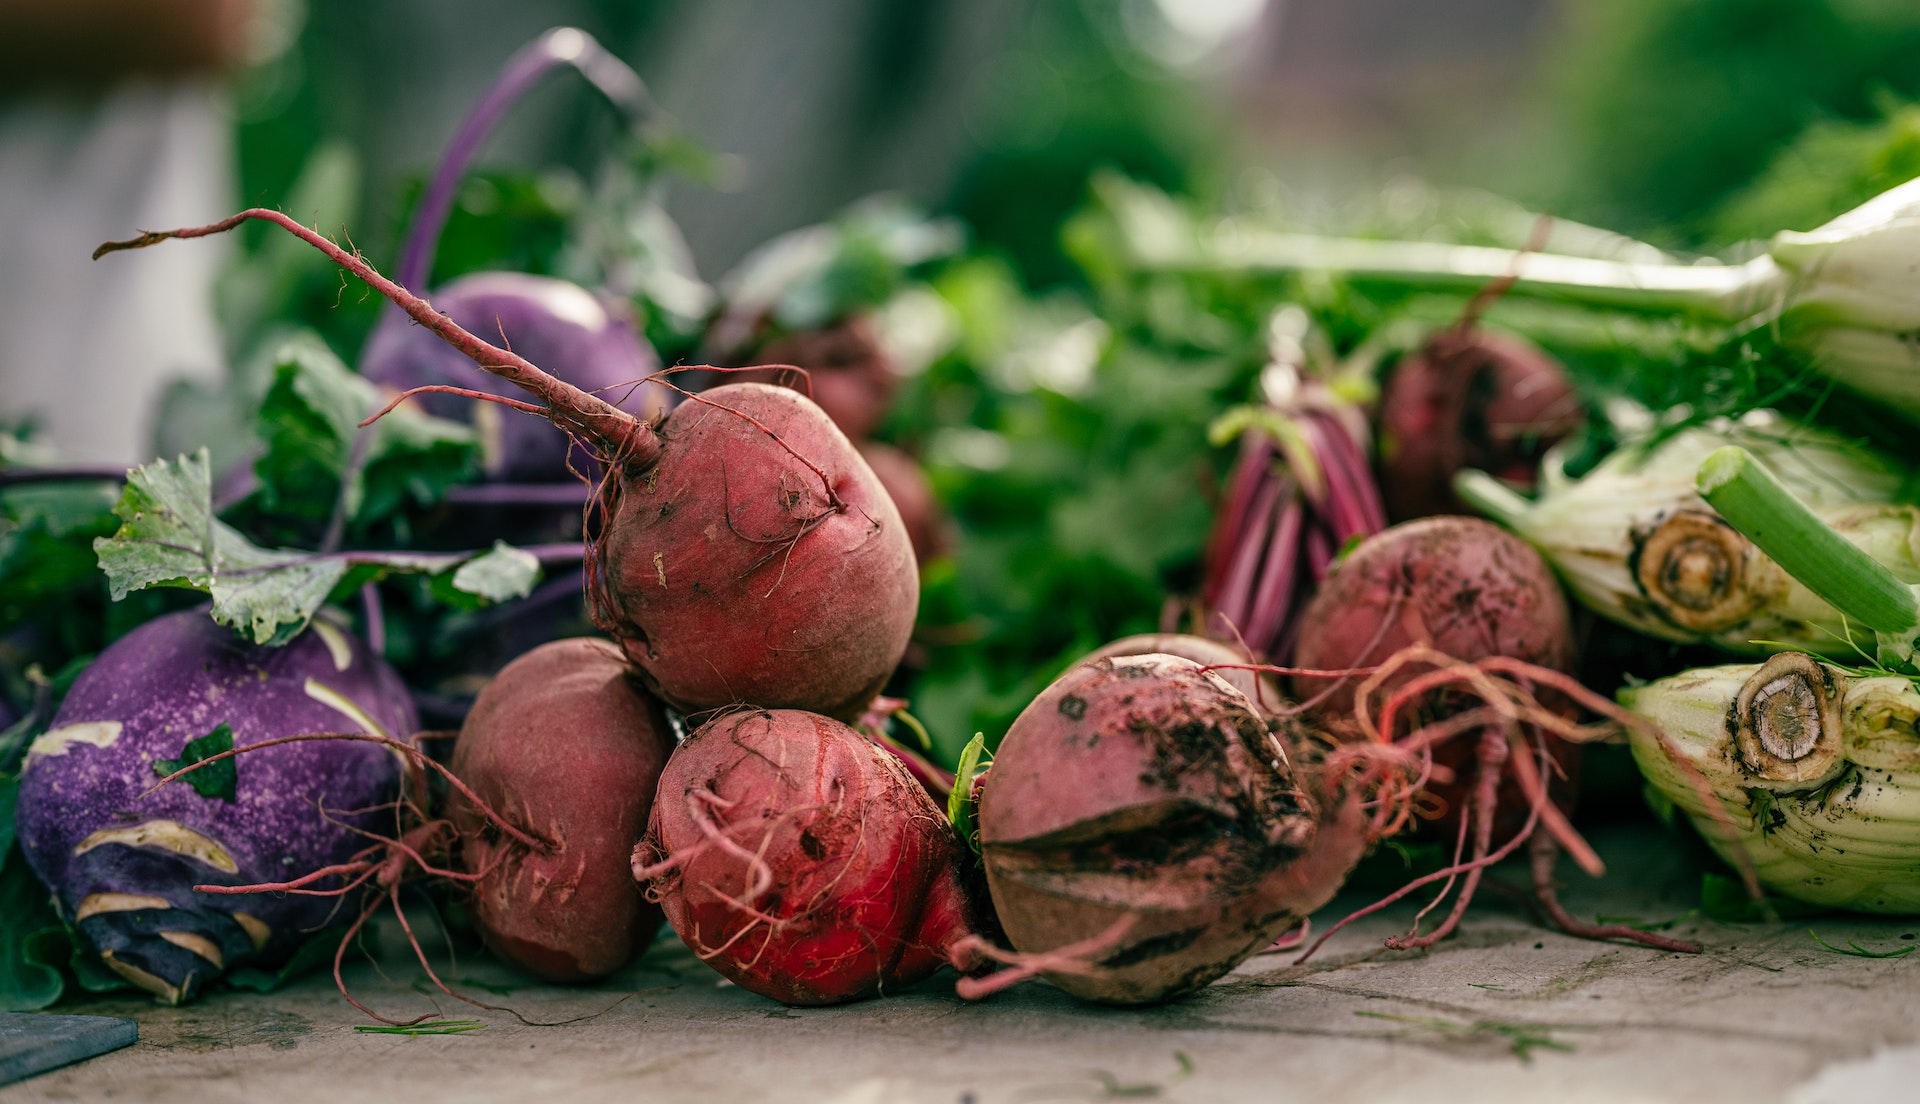 How to cook beets